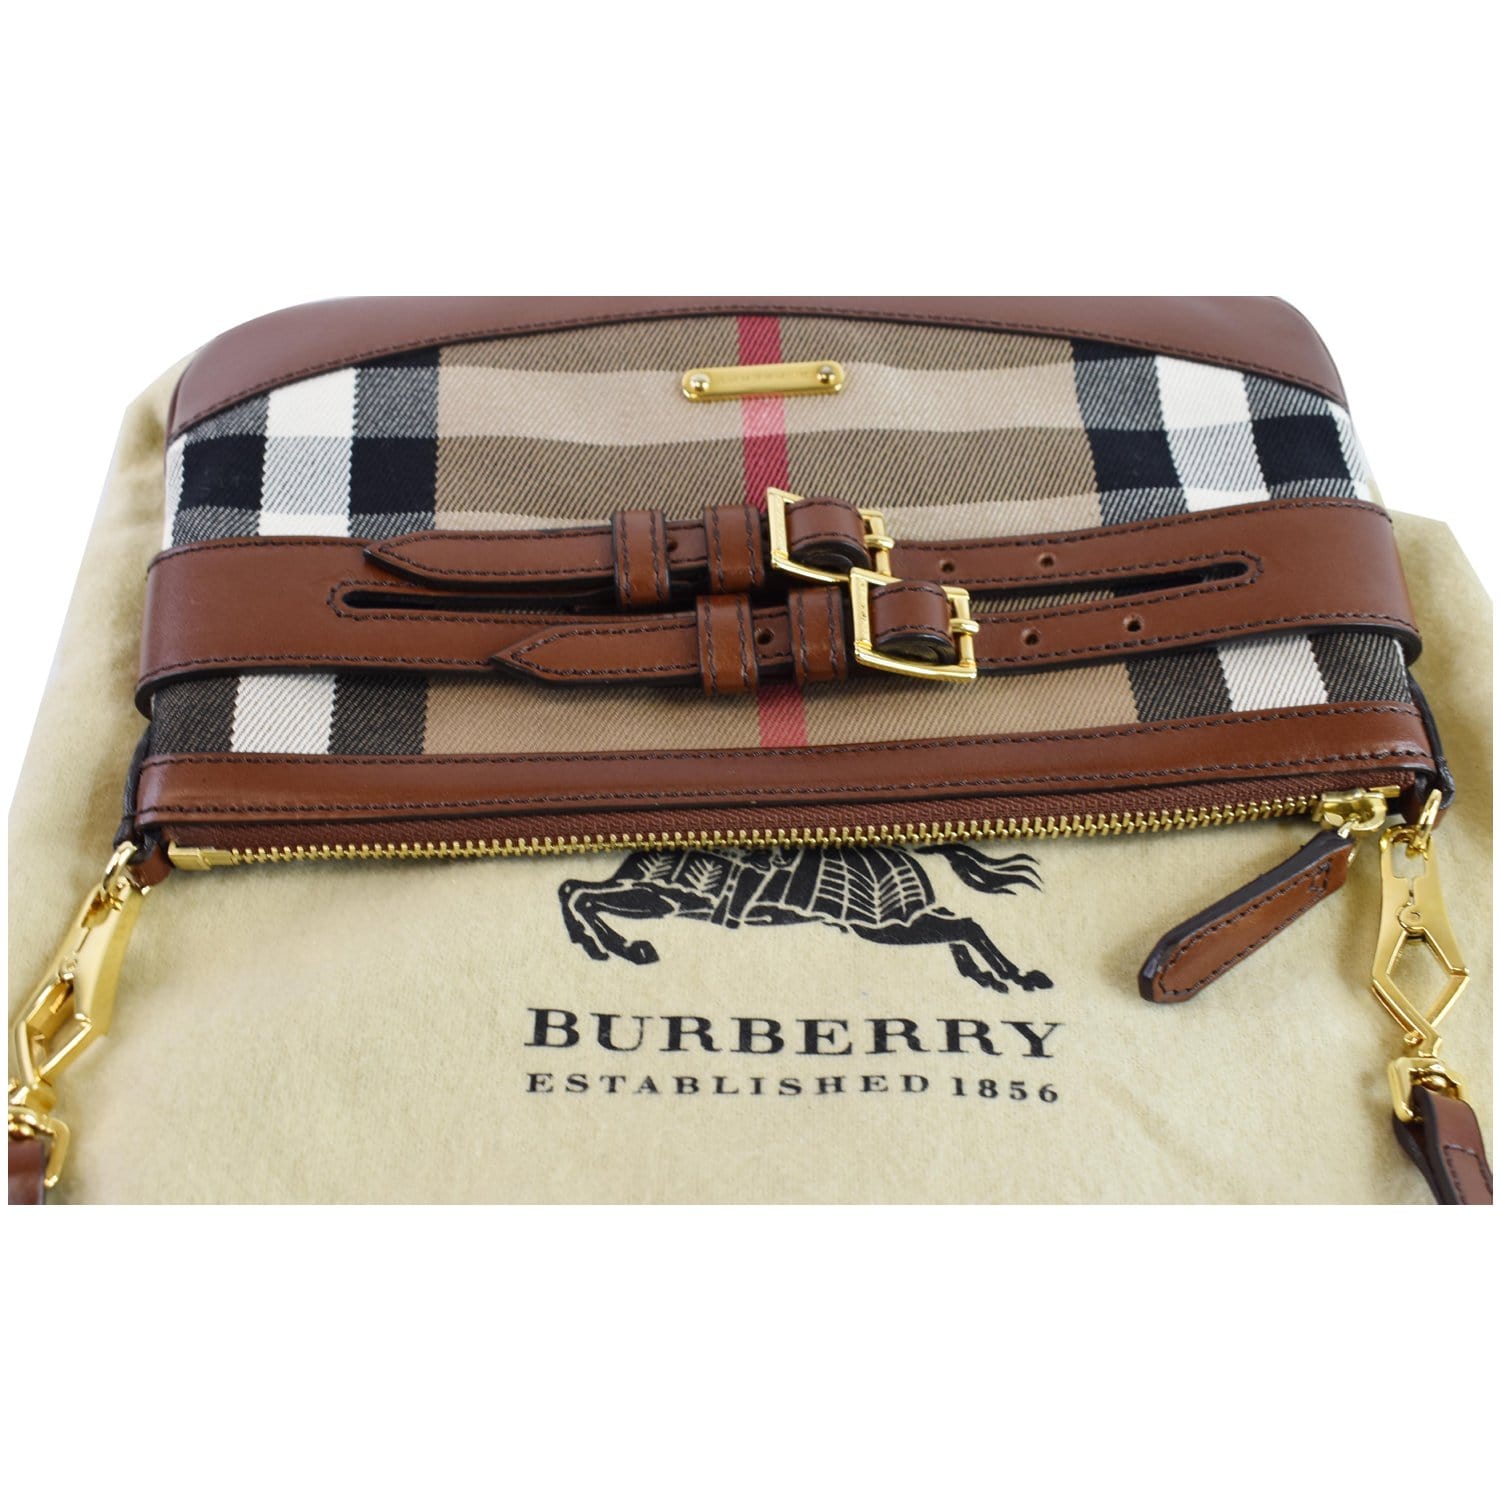 Women Pre-Owned Burberry Clutch Bag Calf Leather Brown WristletBag 